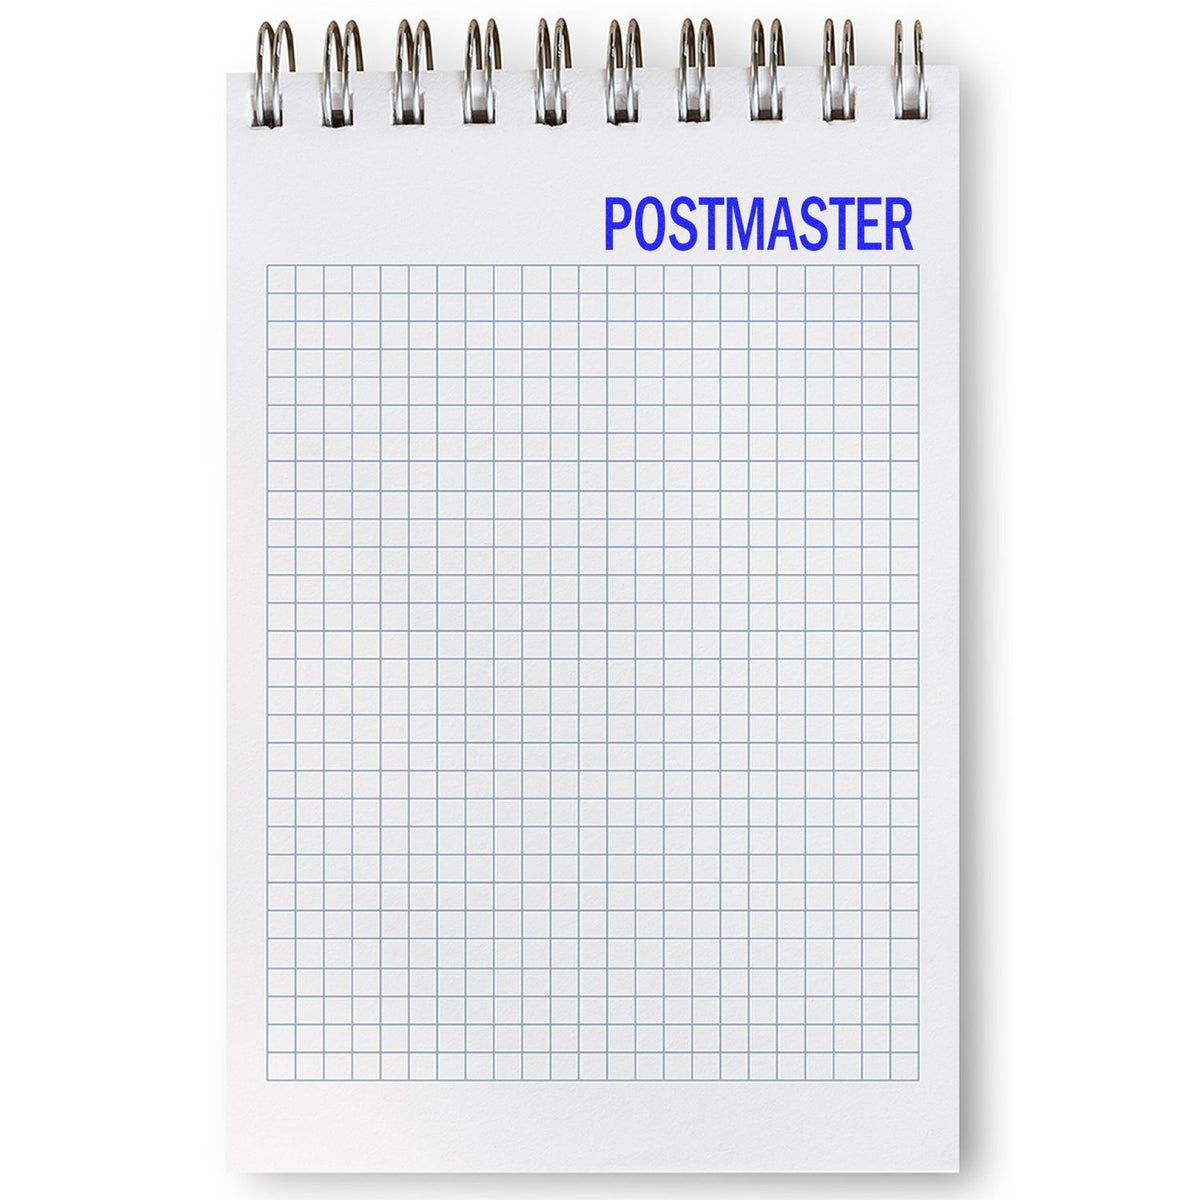 Large Postmaster Rubber Stamp In Use Photo